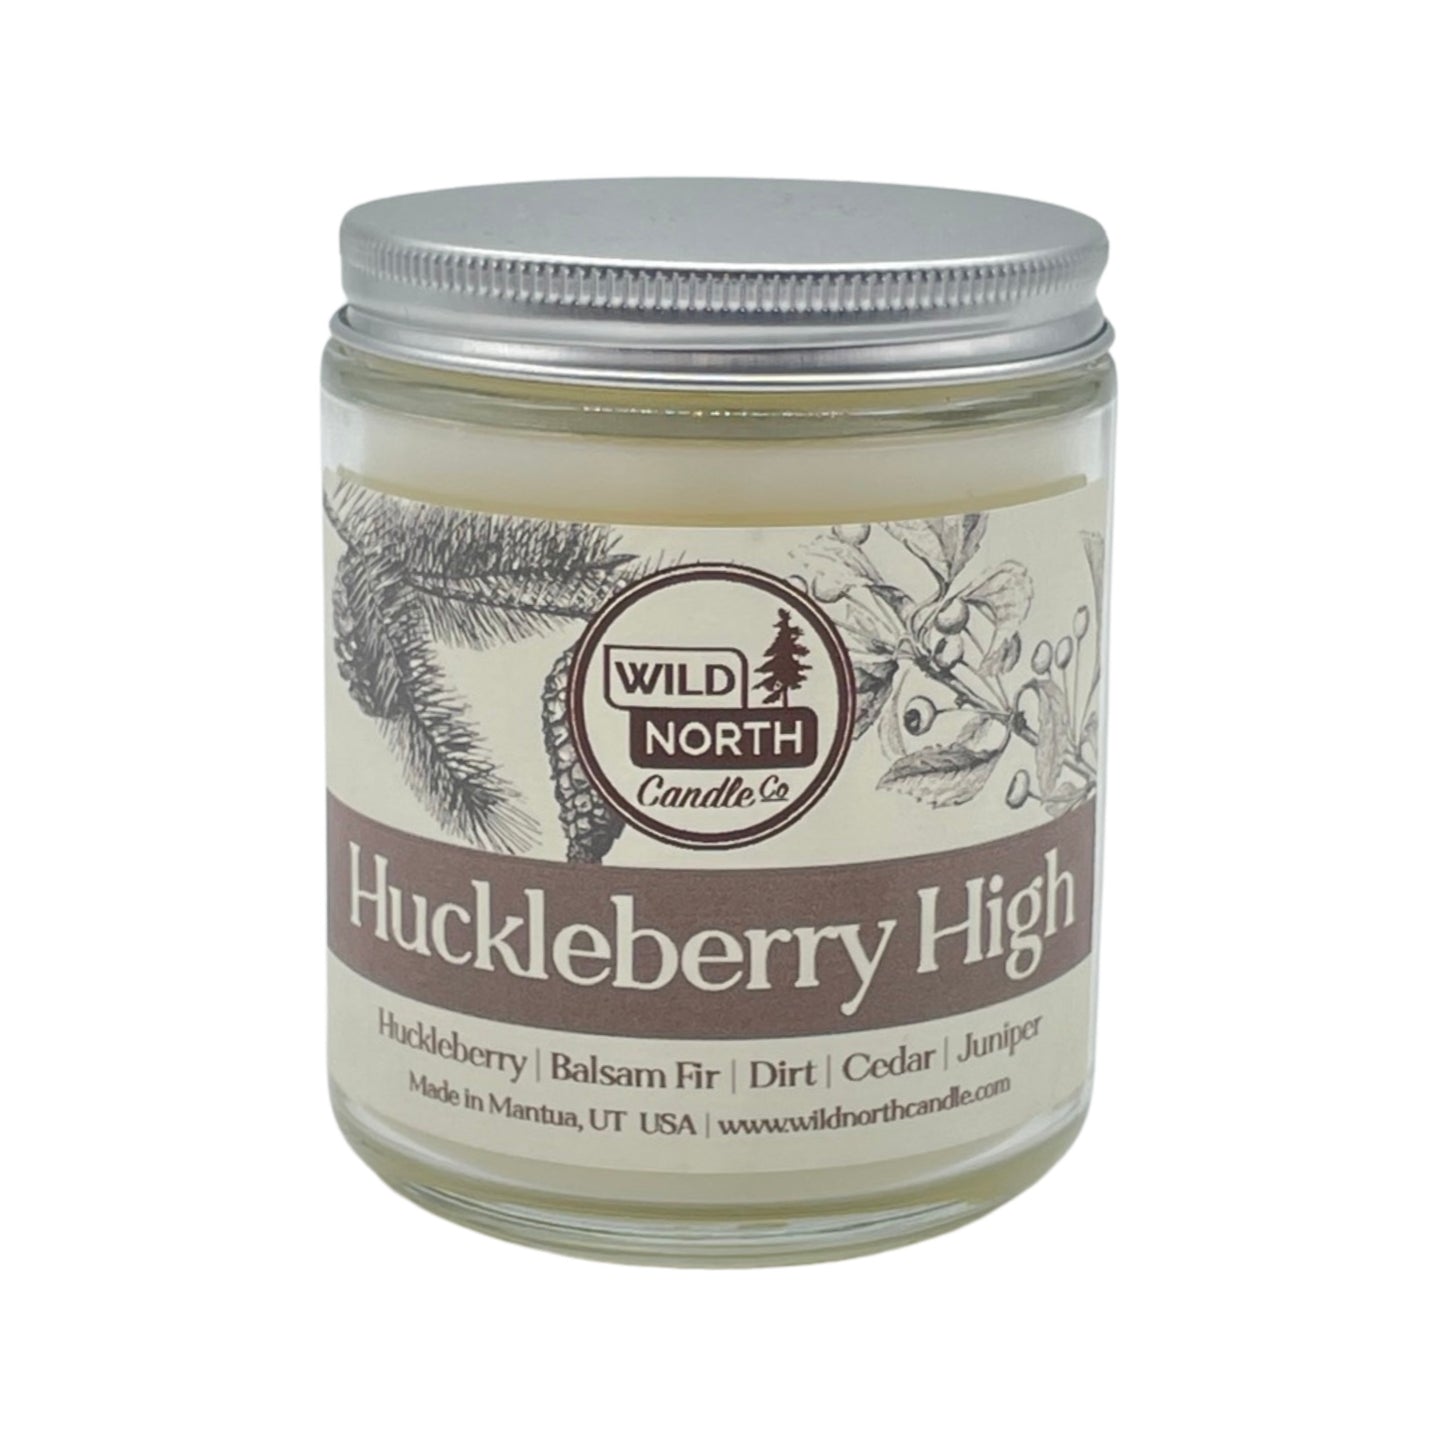 Huckleberry High Soy Blend Wax Candle